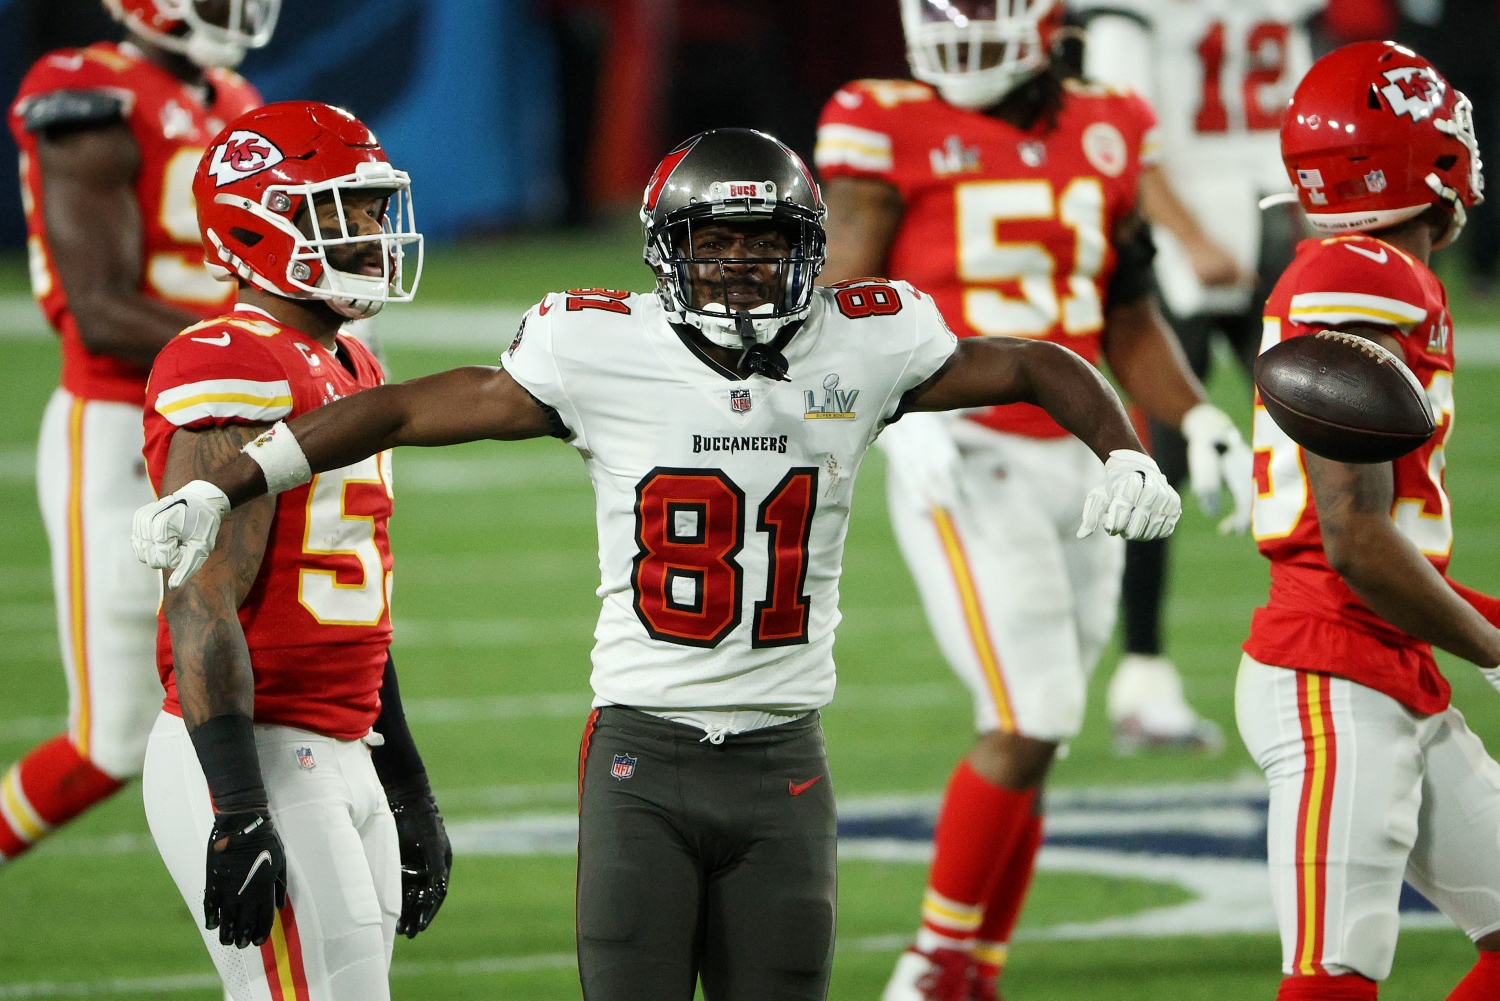 Antonio Brown celebrates making a catch for the Tampa Bay Buccaneers in Super Bowl 55.